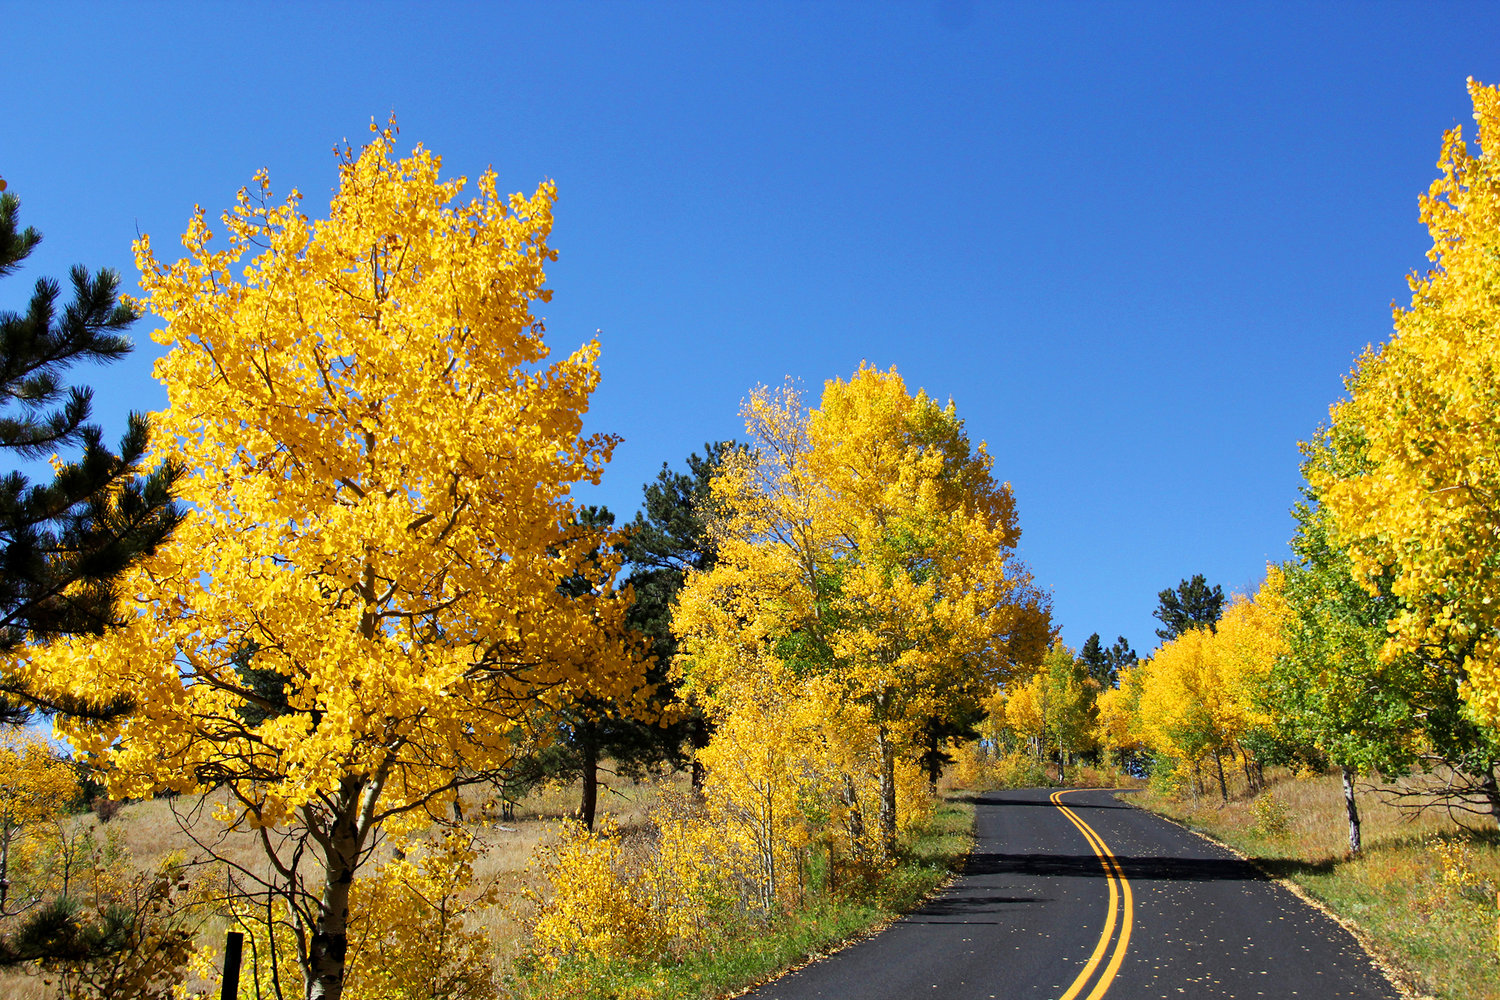 The fall colors peak in Golden Gate Canyon State Park from September through October.